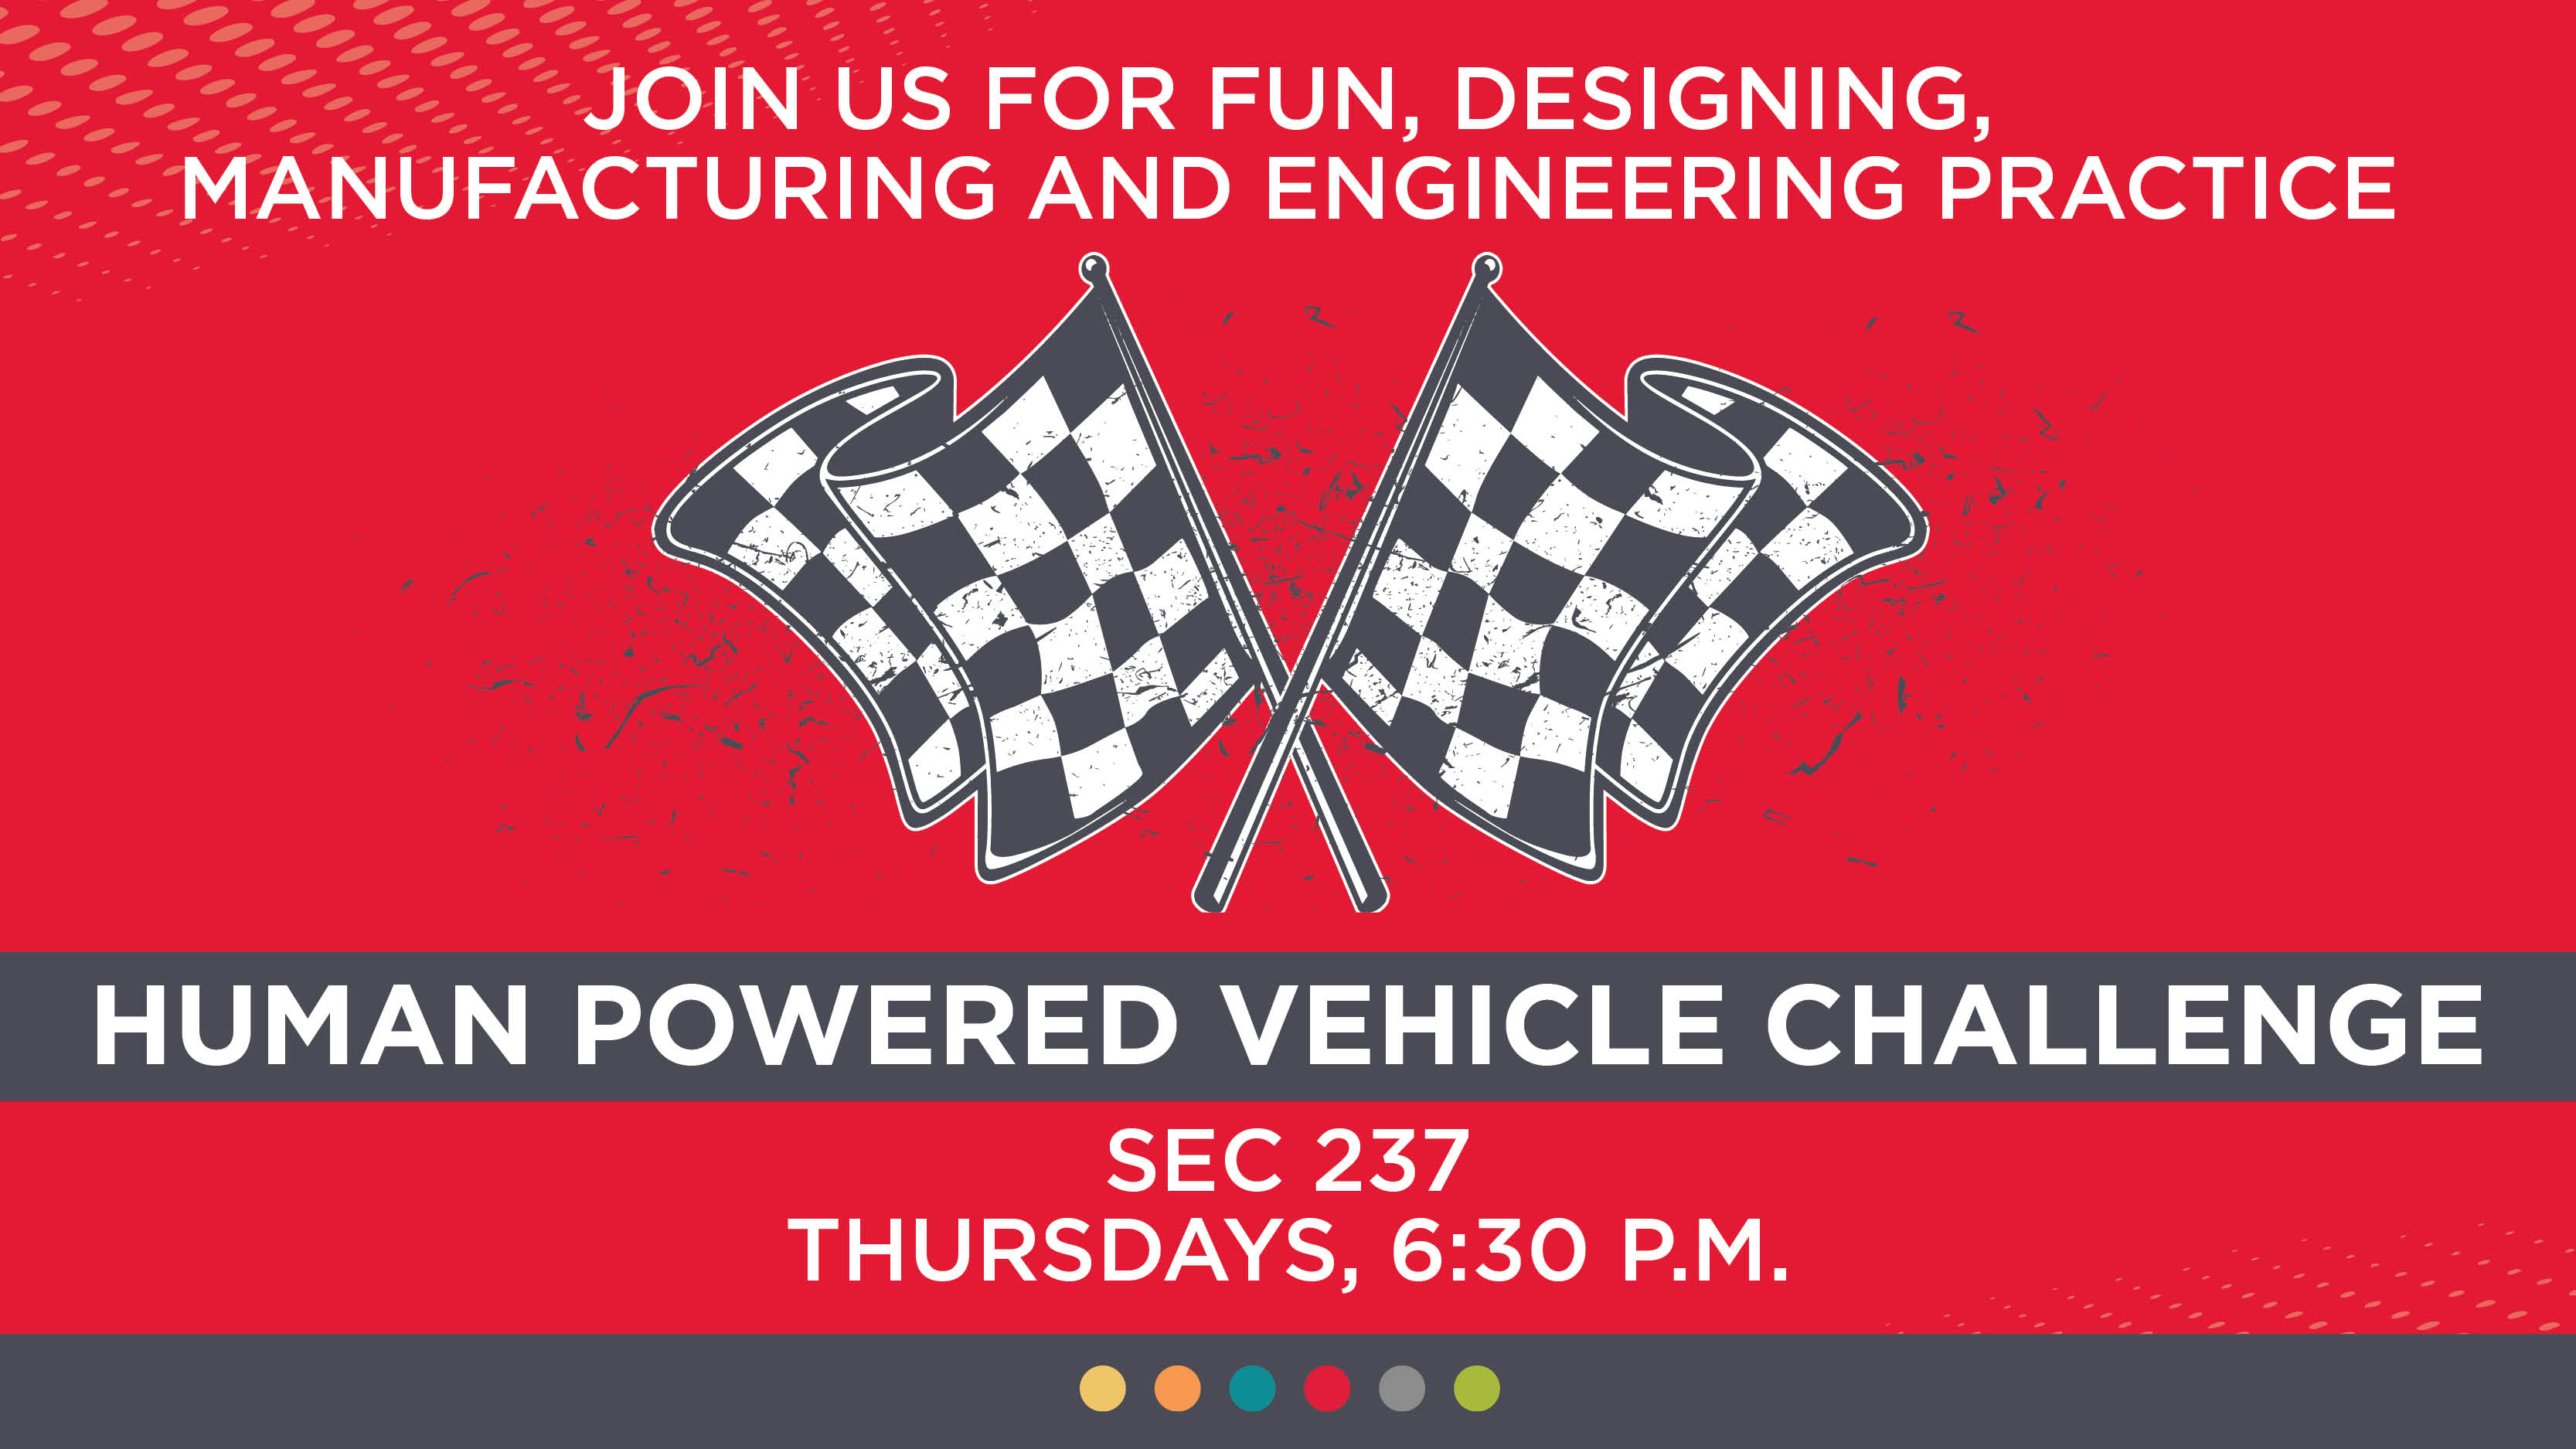 Human Powered Vehicle Challenge club meets at 6:30 p.m. Thursdays in SEC 237.